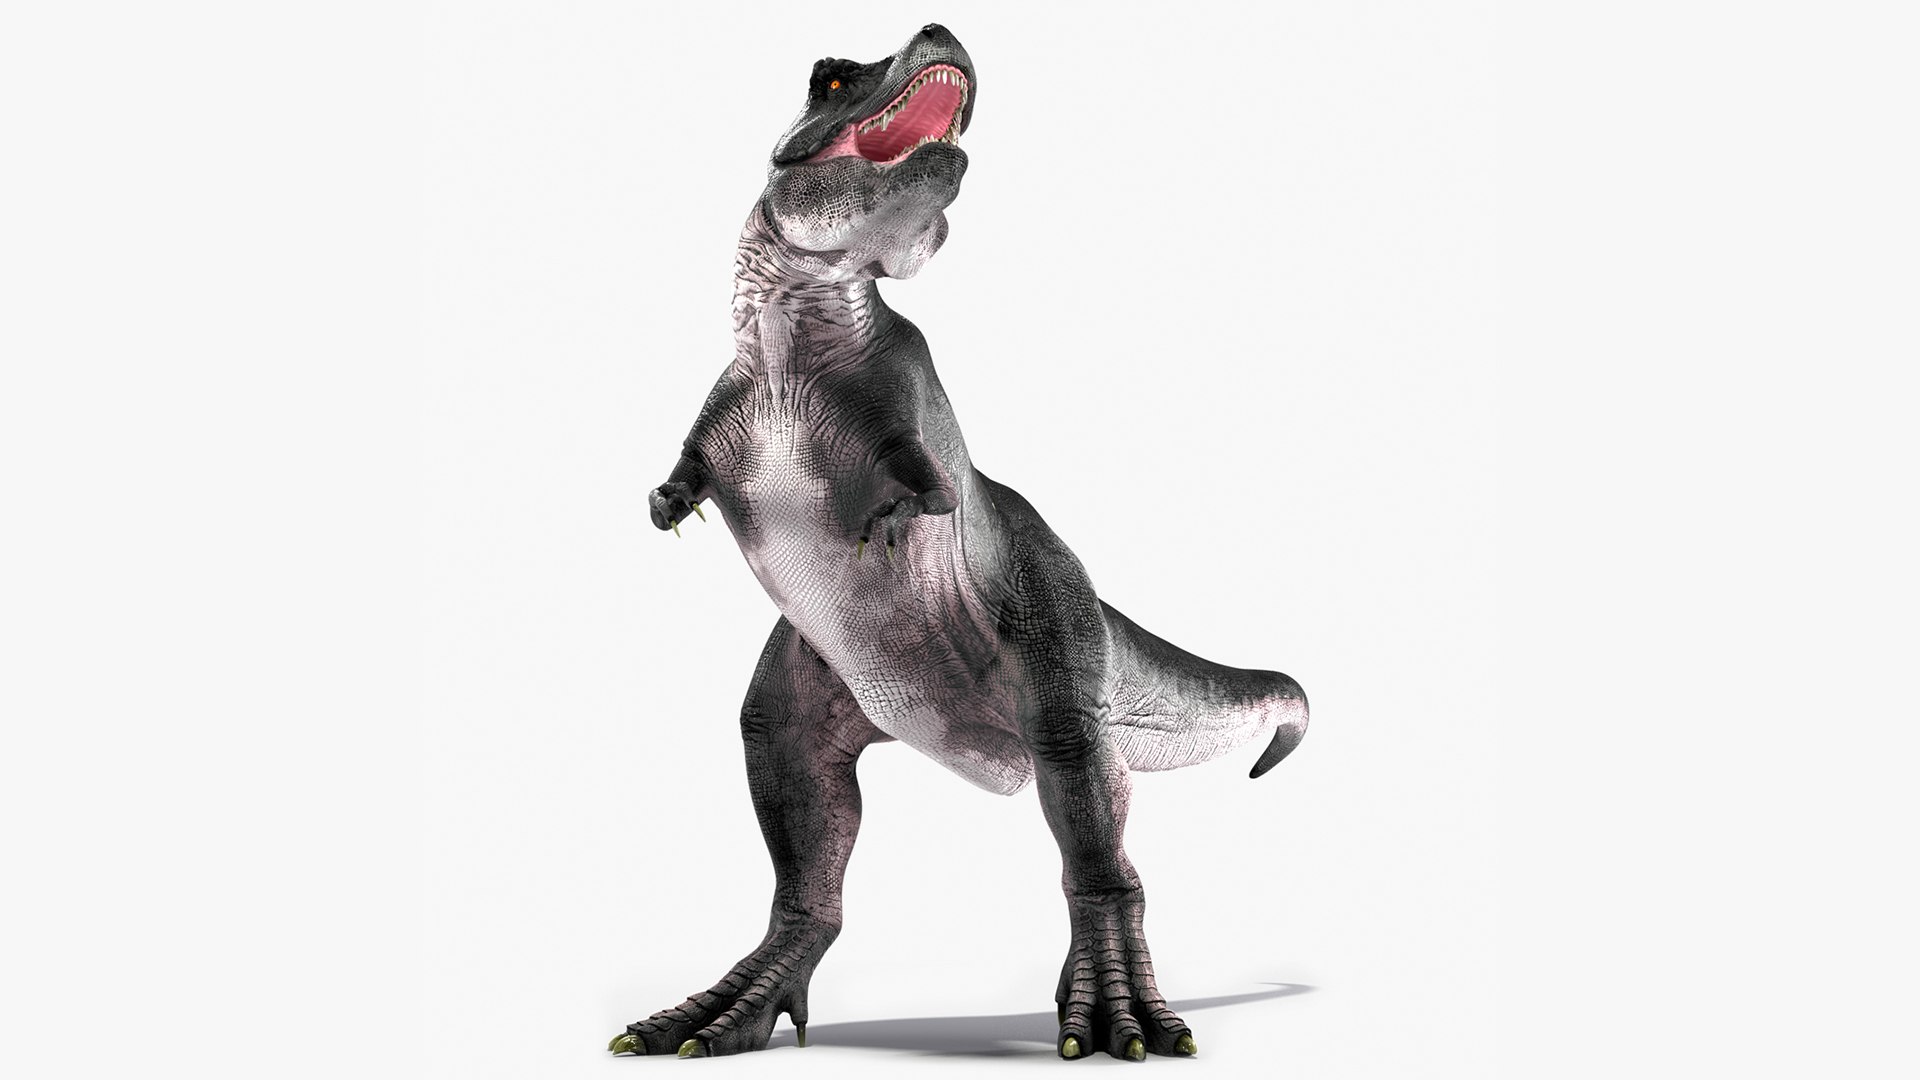 A t-rex wearing a stylish suit striking a confident pose wist mouth closed  on Craiyon